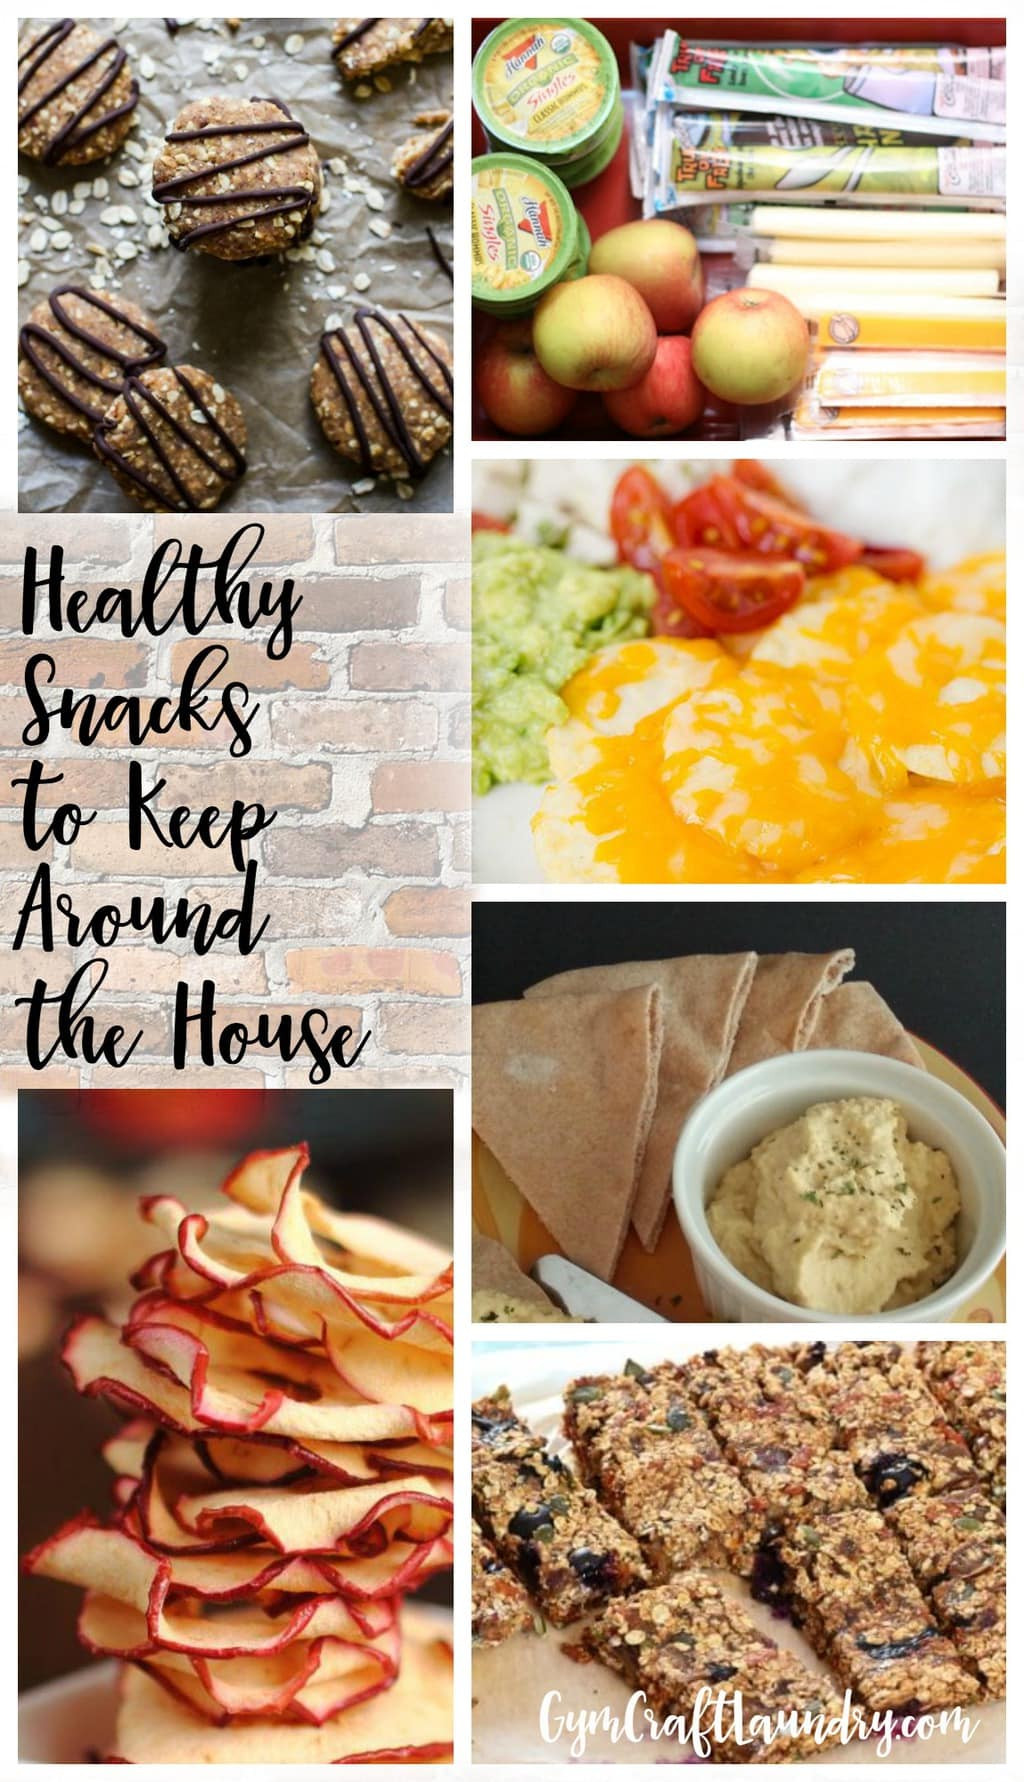 Healthy Snacks To Keep At Work
 Healthy Snacks to Keep Around the House Gym Craft Laundry